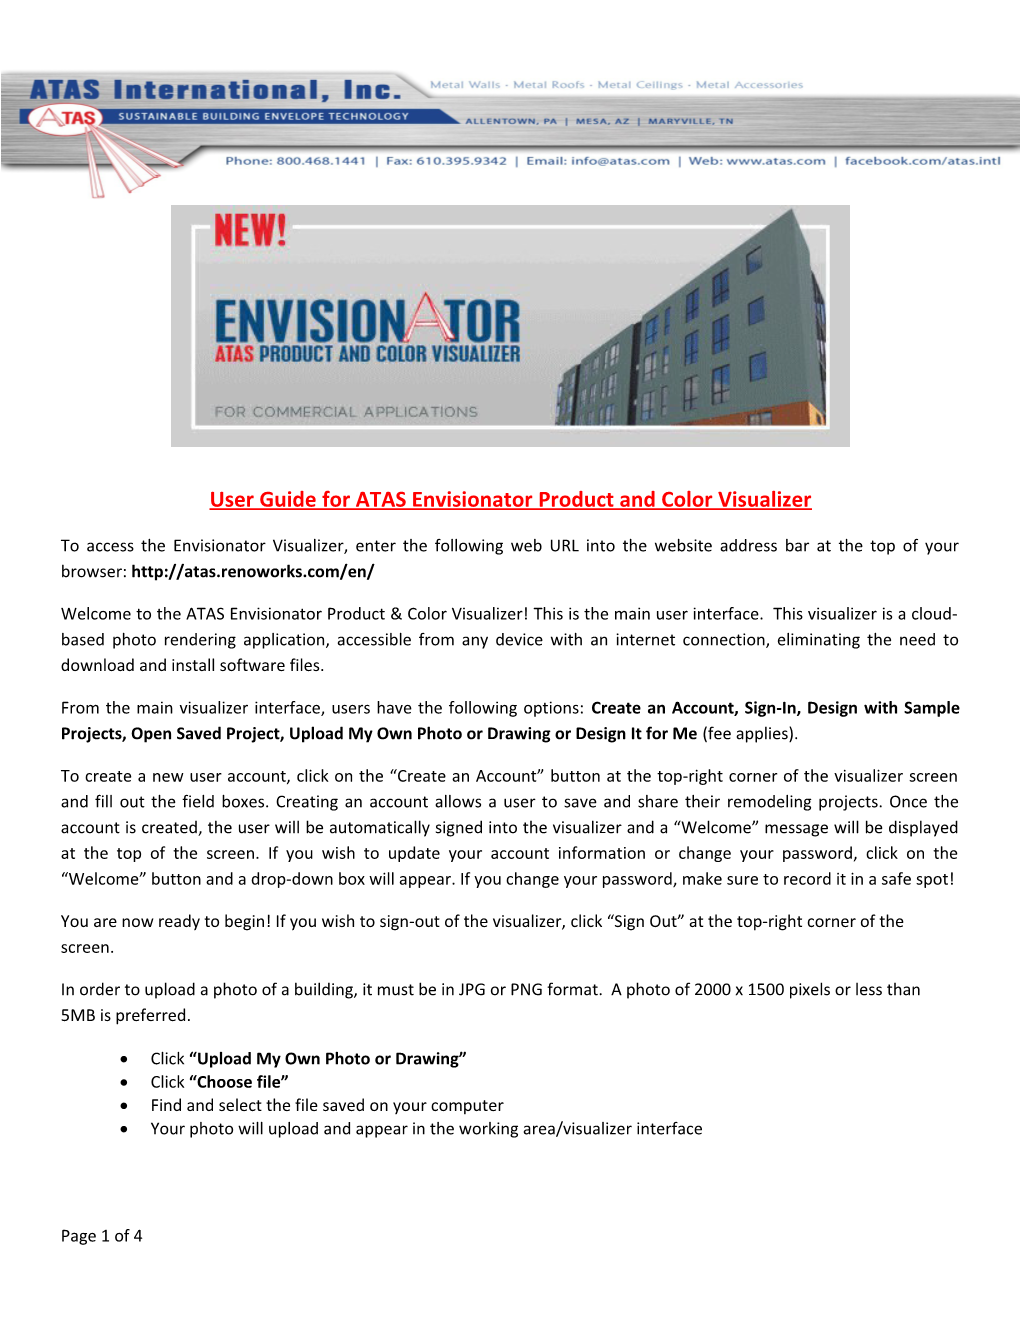 User Guide for ATAS Envisionator Product and Color Visualizer